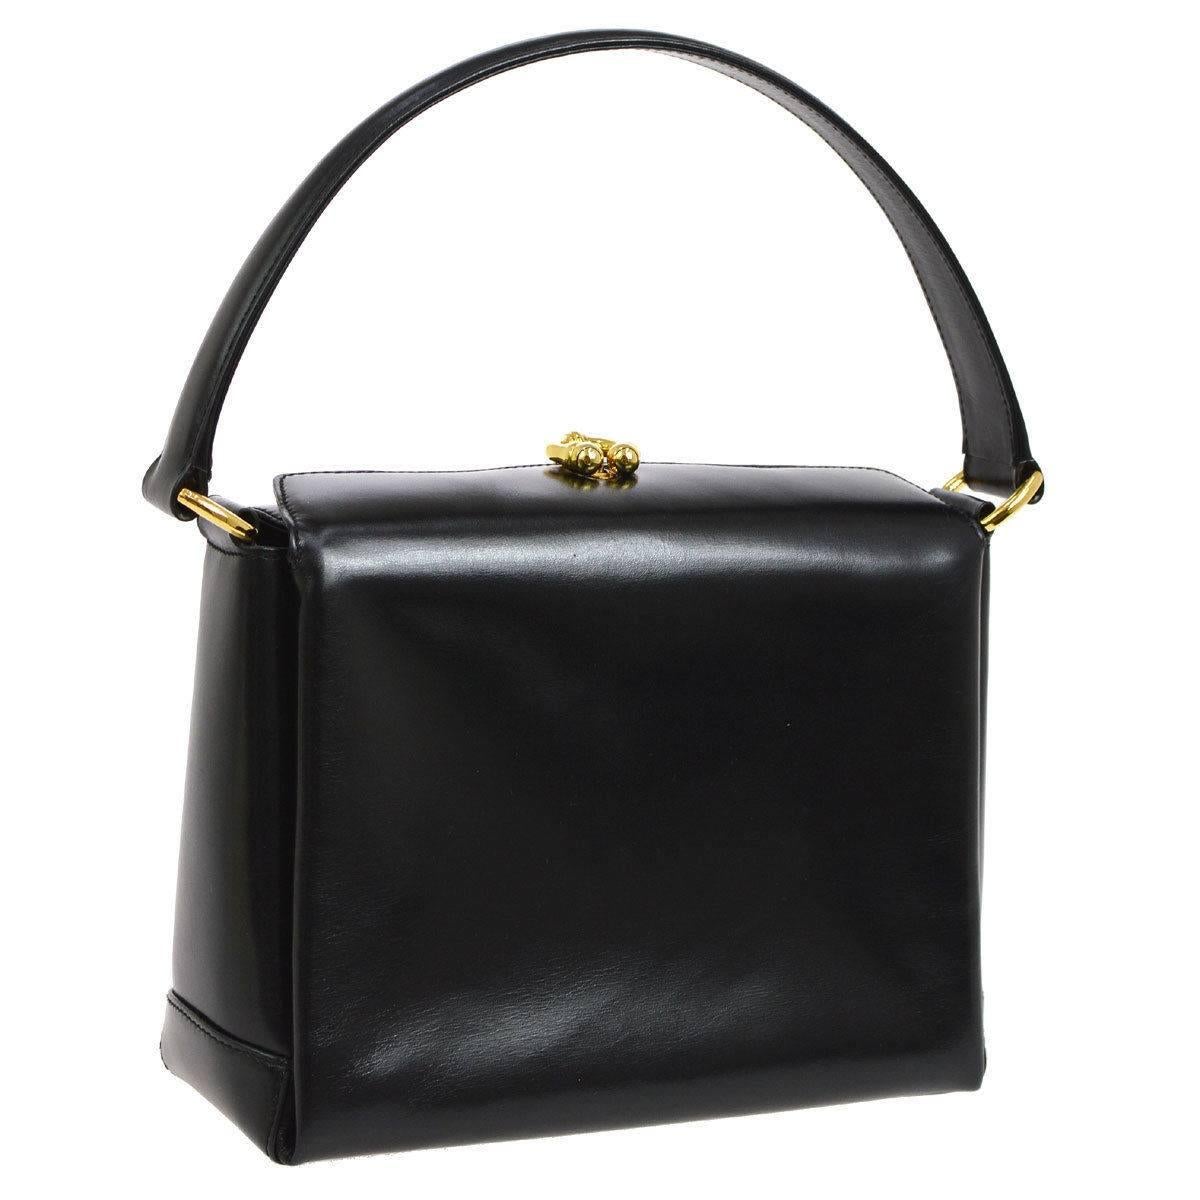 Gucci Black Leather Gold Emblem Kelly Style Party Evening Top Handle Satchel Bag